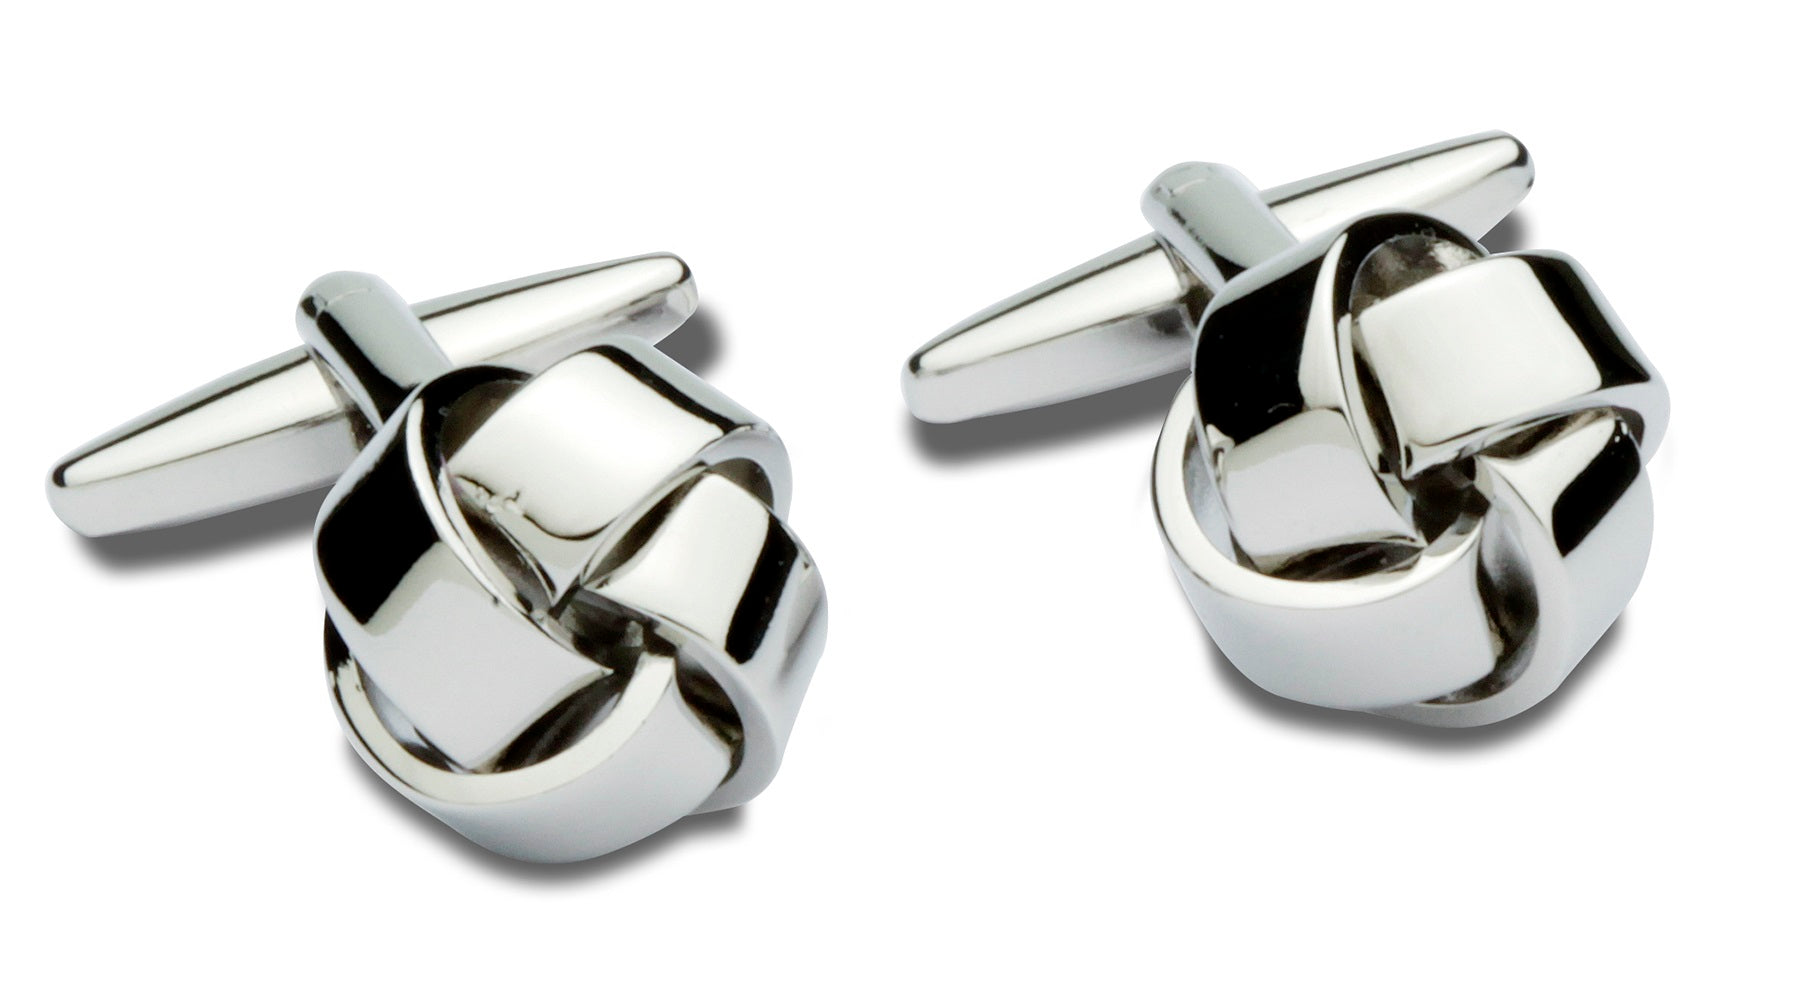 French-Knot Polished Silver Cufflinks